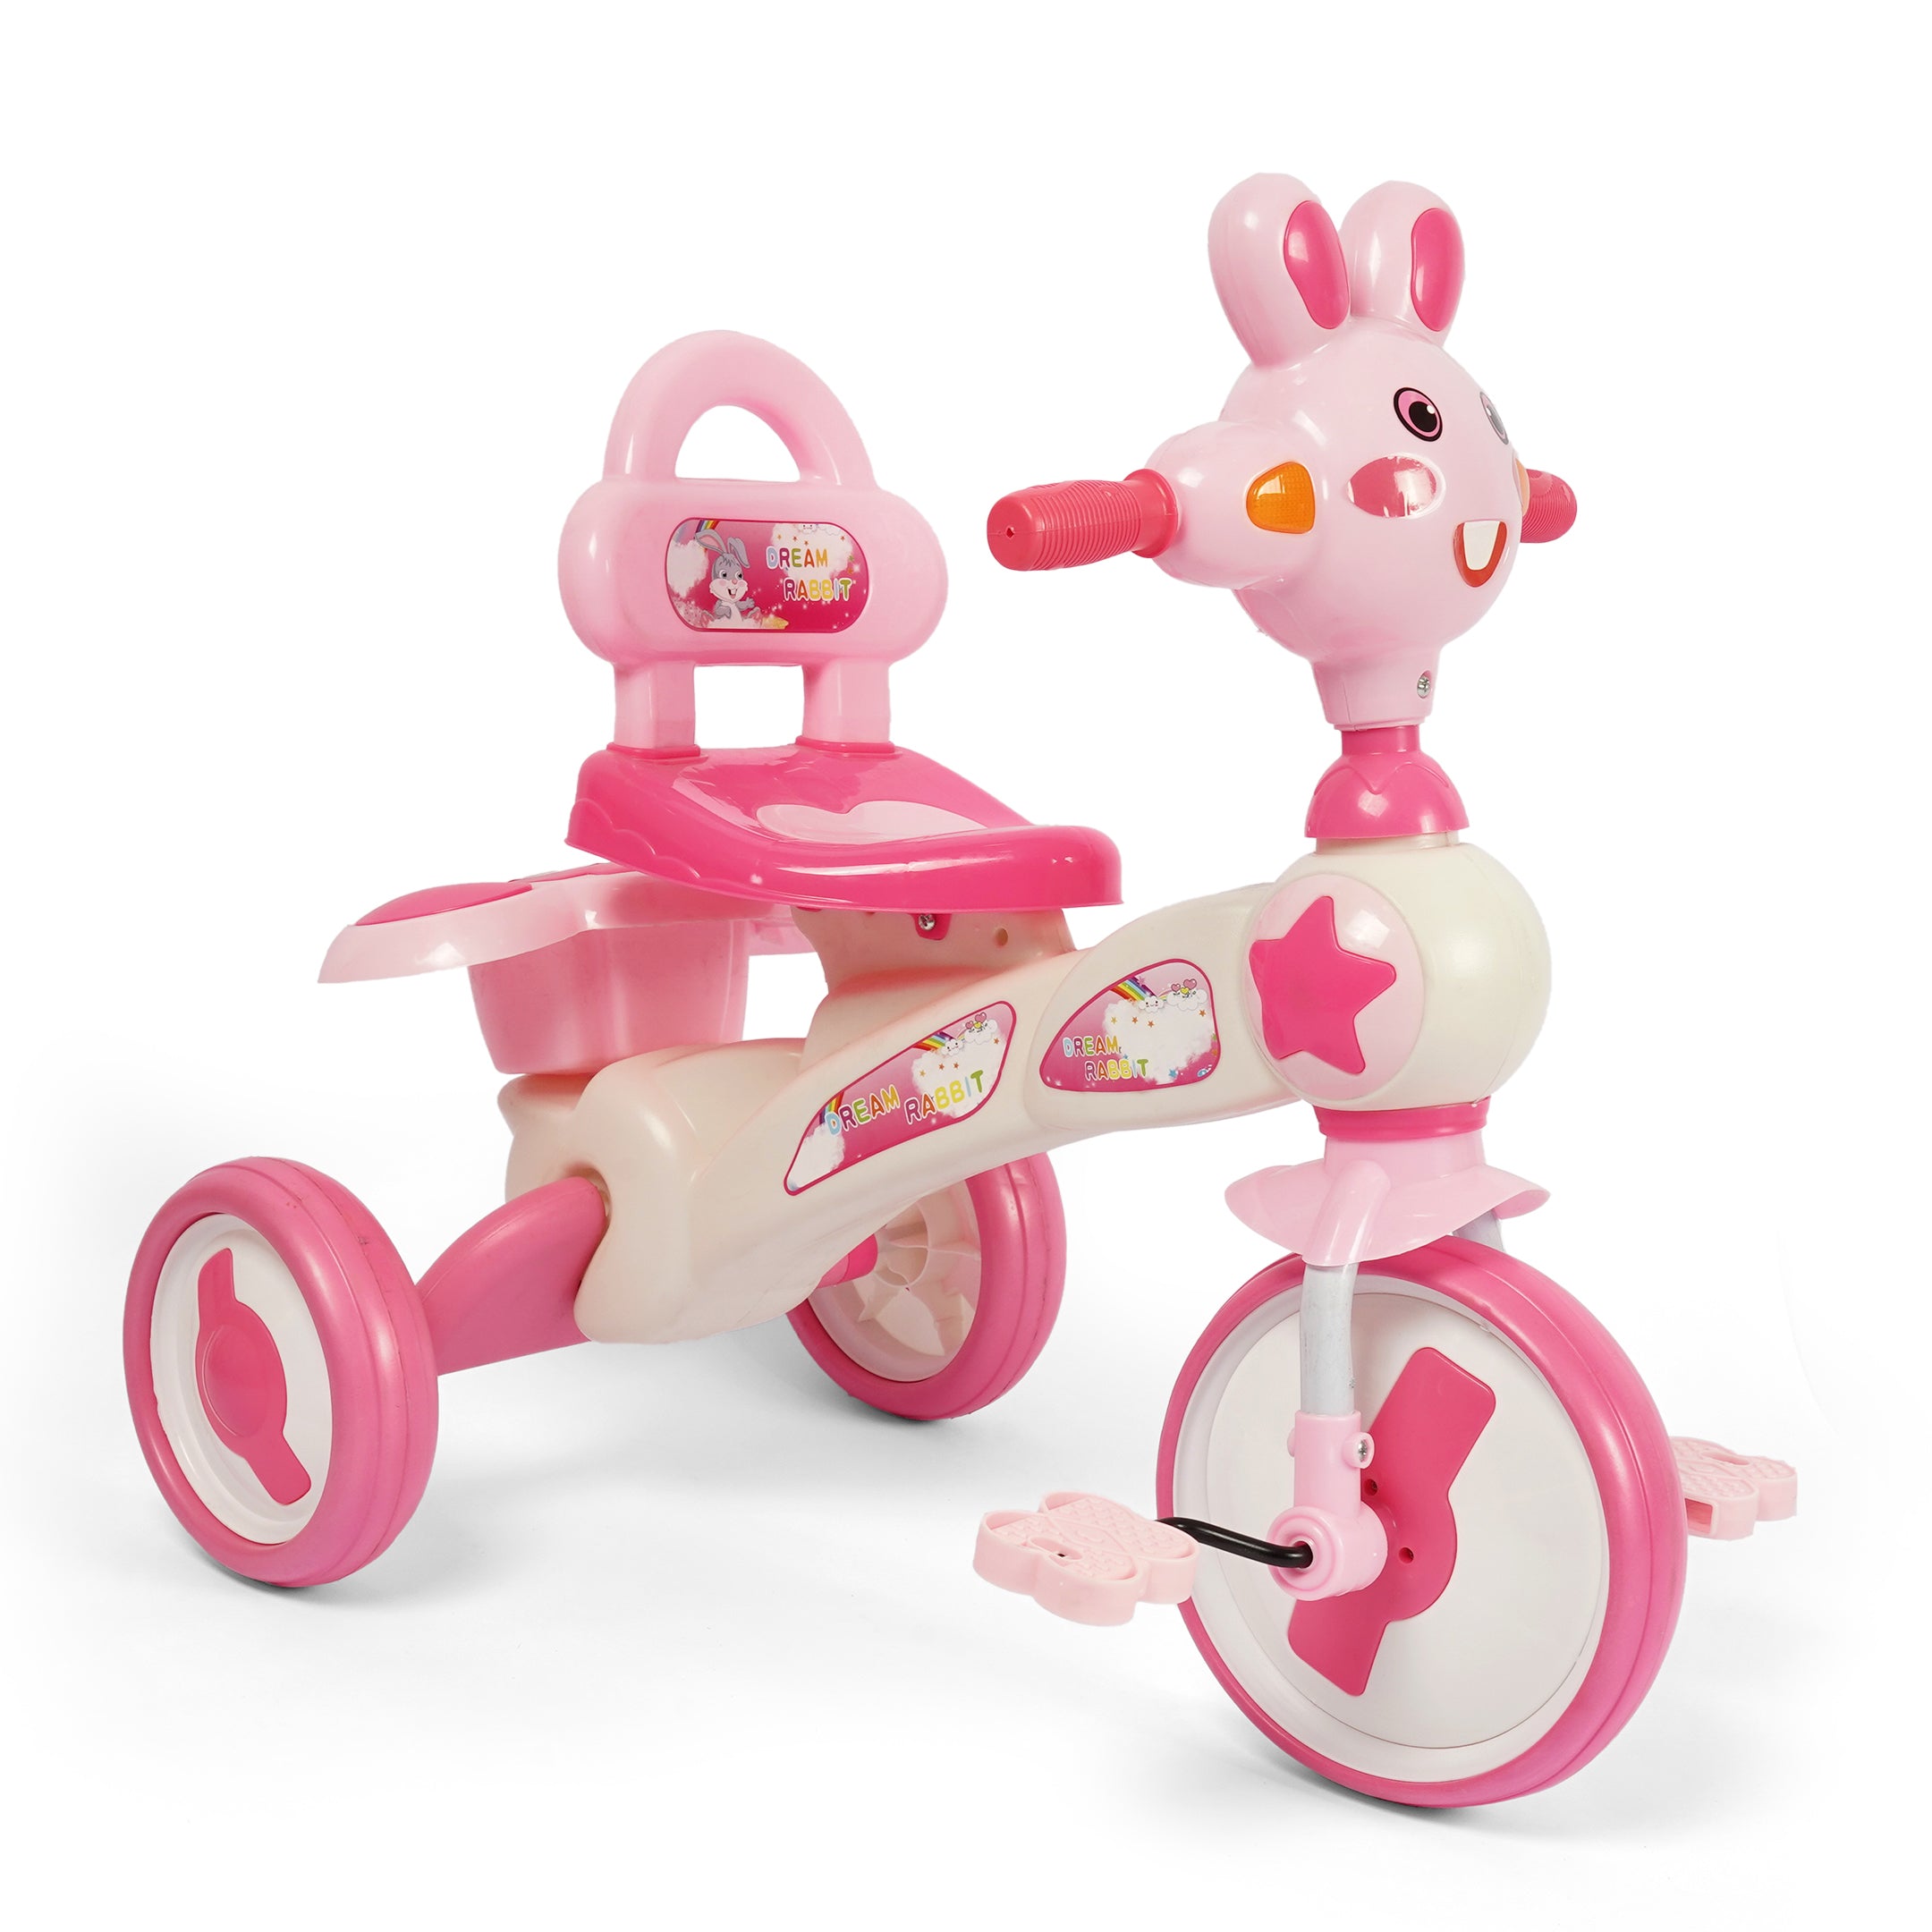 Bunny Face Kids Deluxe Tricycle - Multicolor